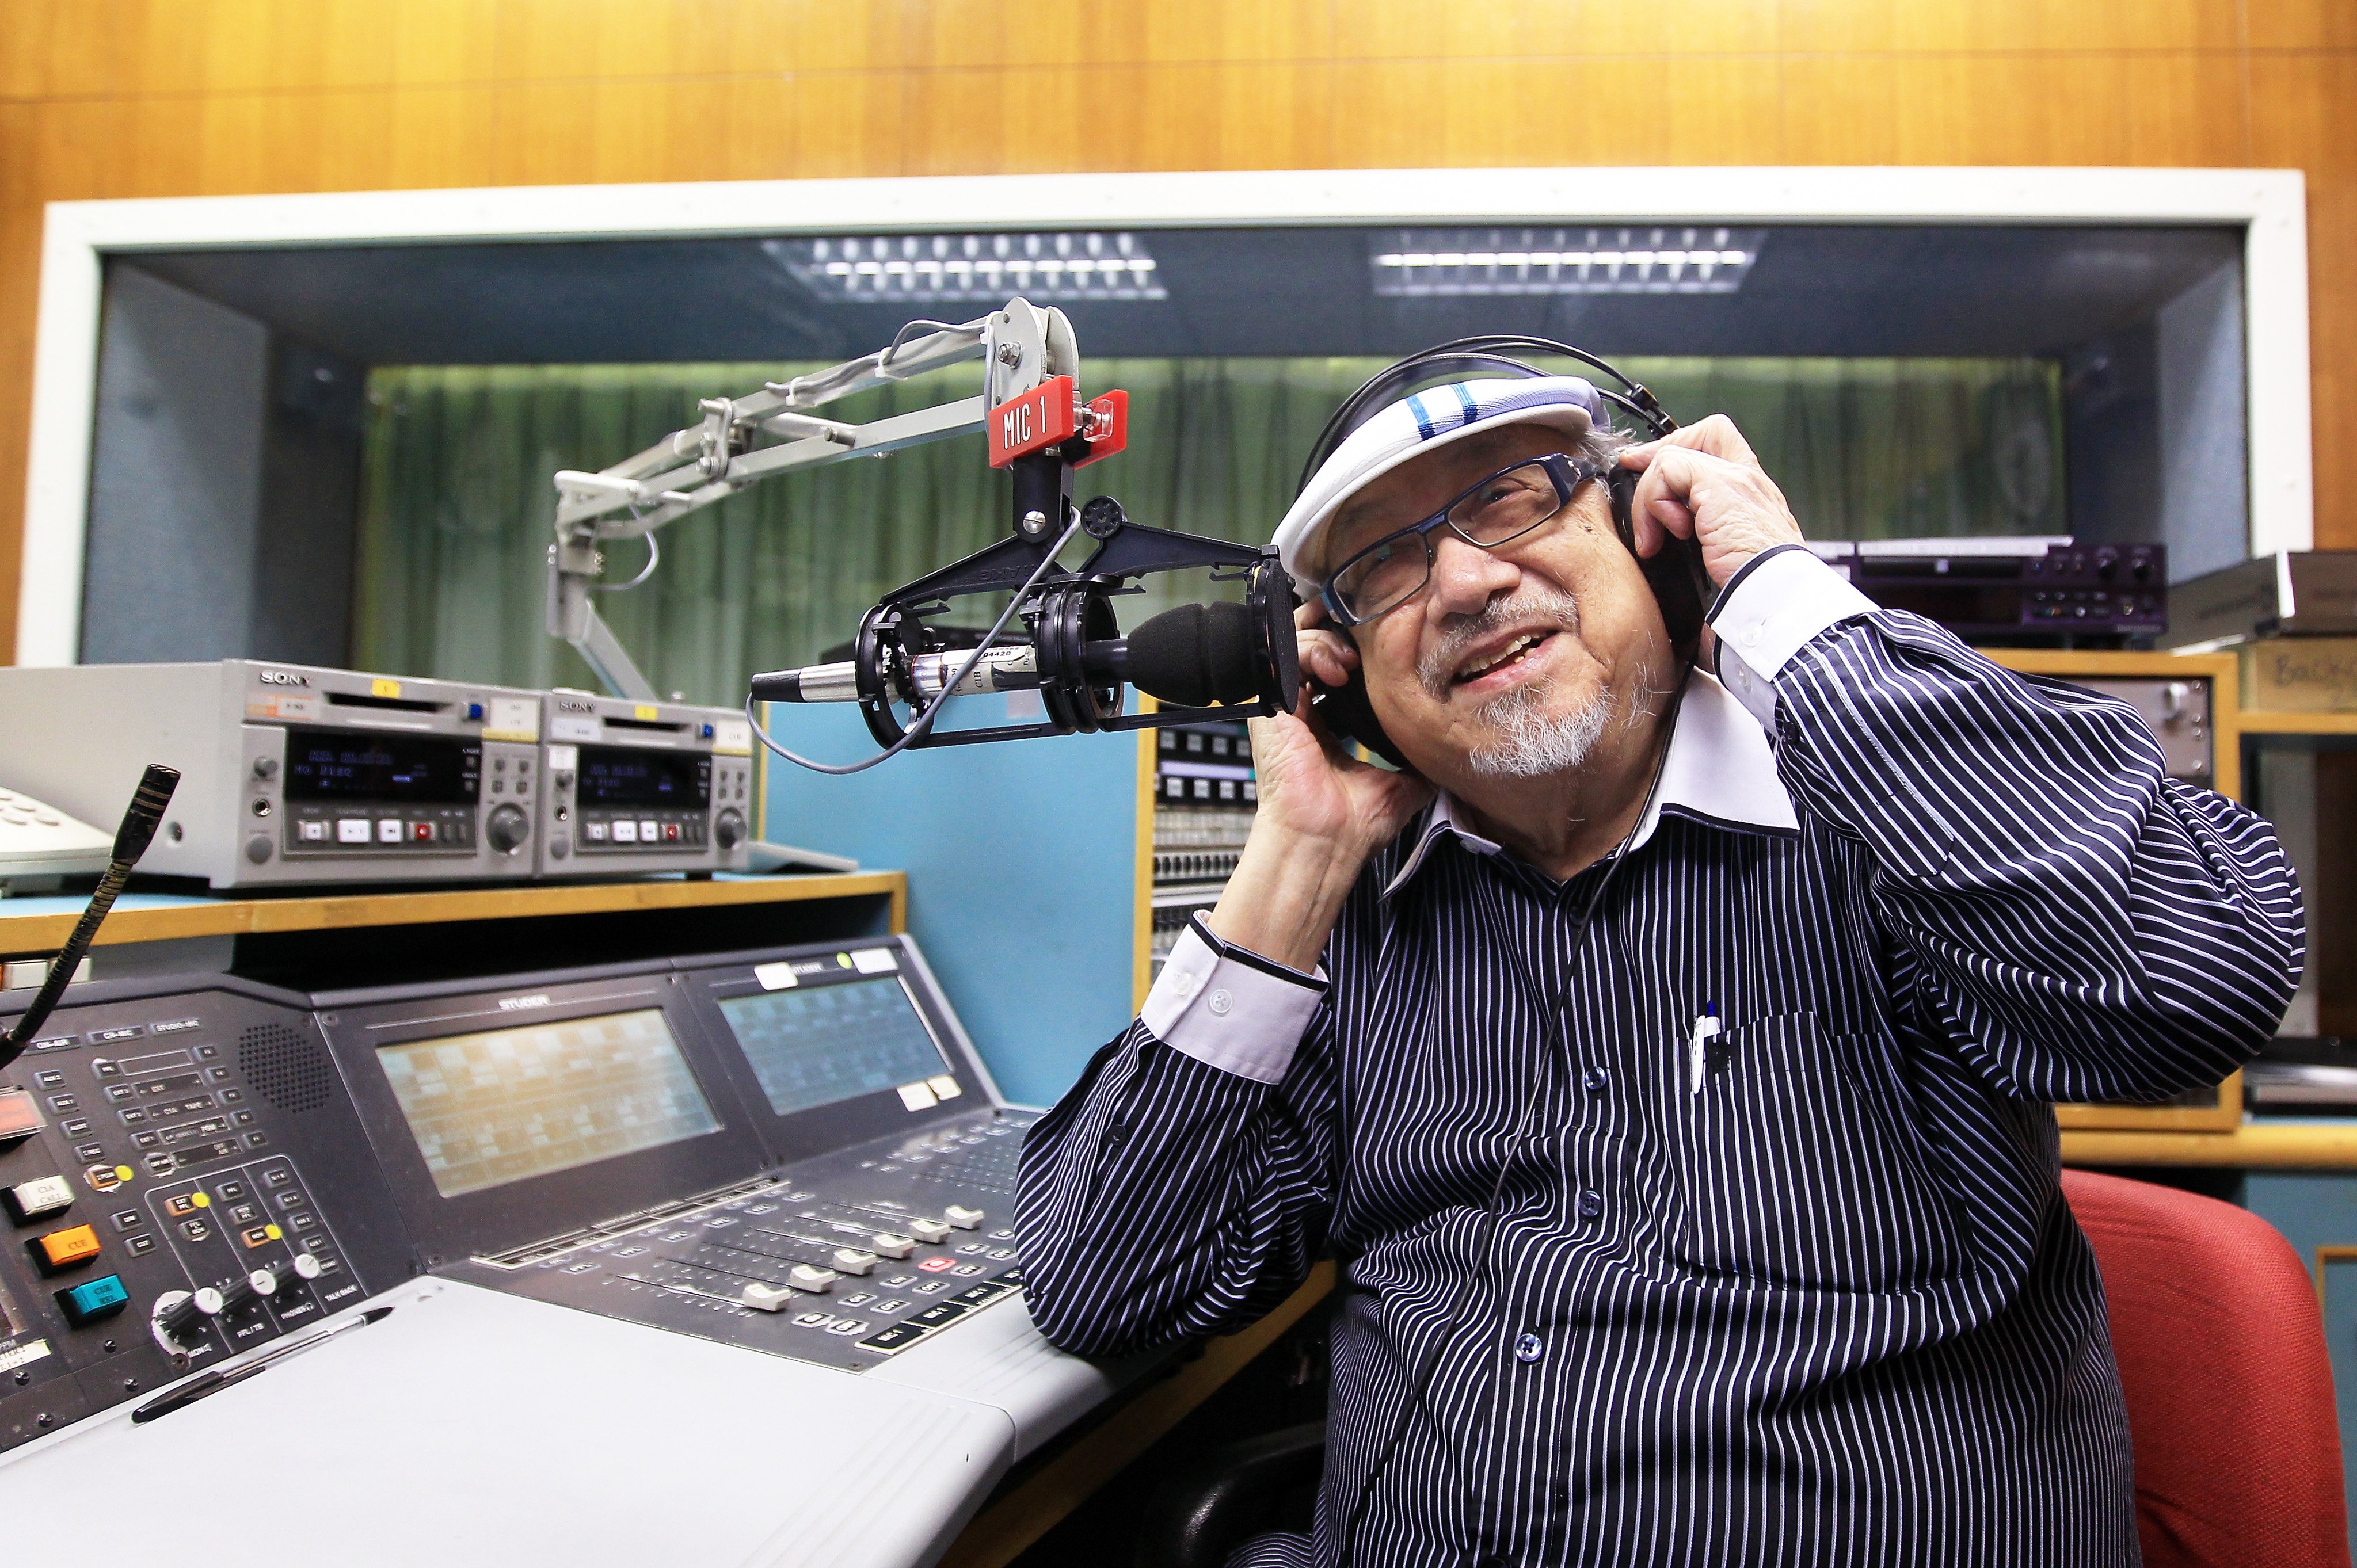 Hong Kong radio legend “Uncle” Ray Cordeiro at his RTHK studio in Kowloon Tong in 2012. Photo: SCMP